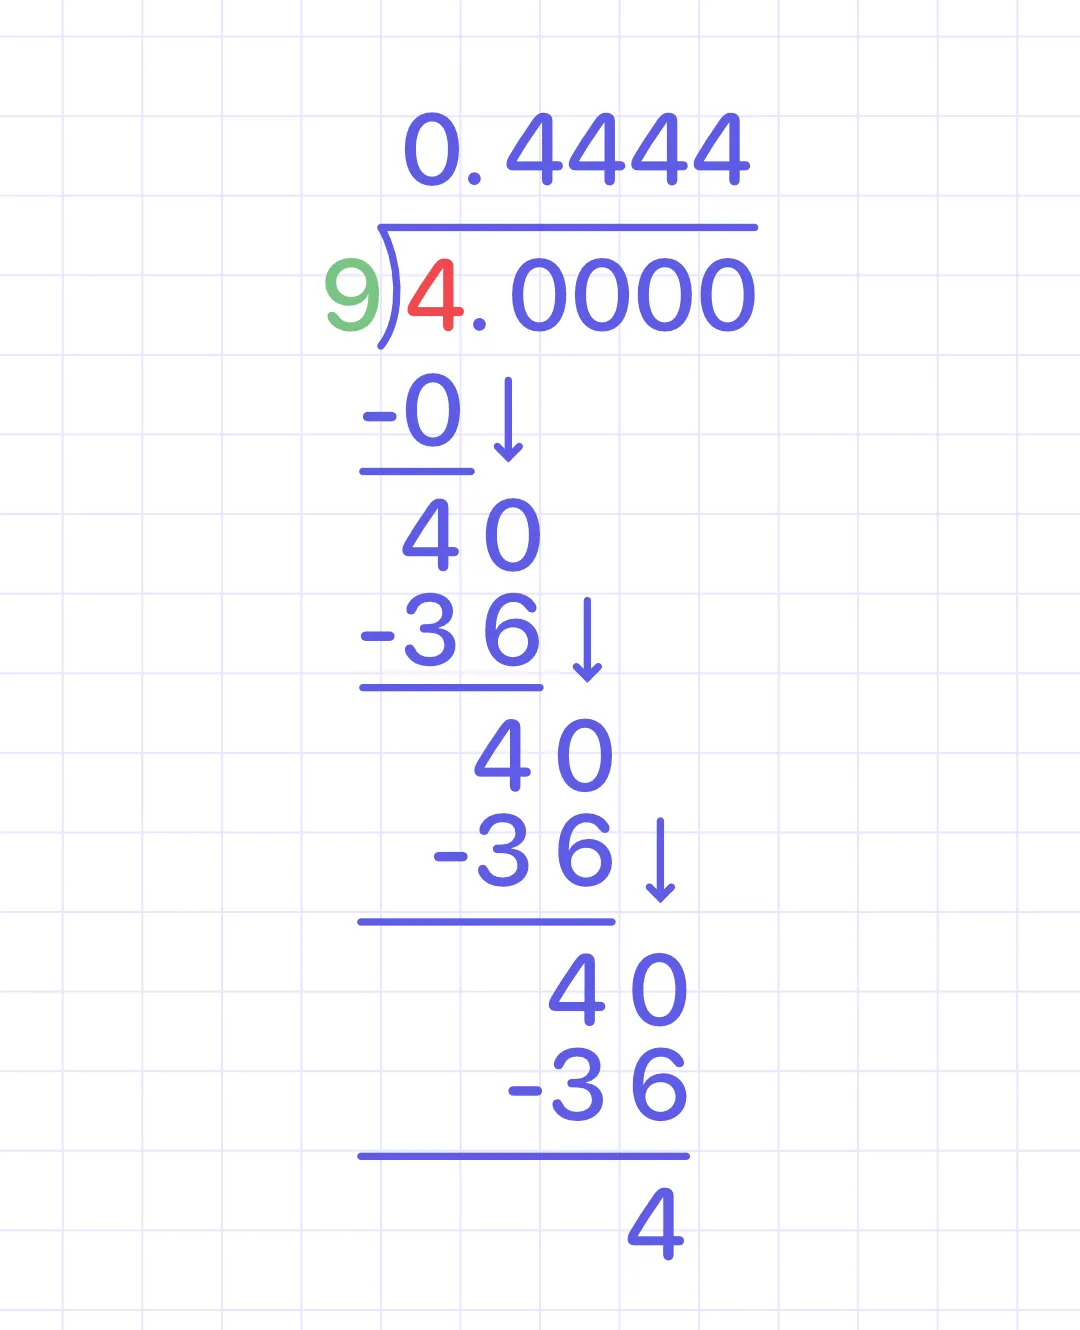 Converting between repeating decimals and fractions